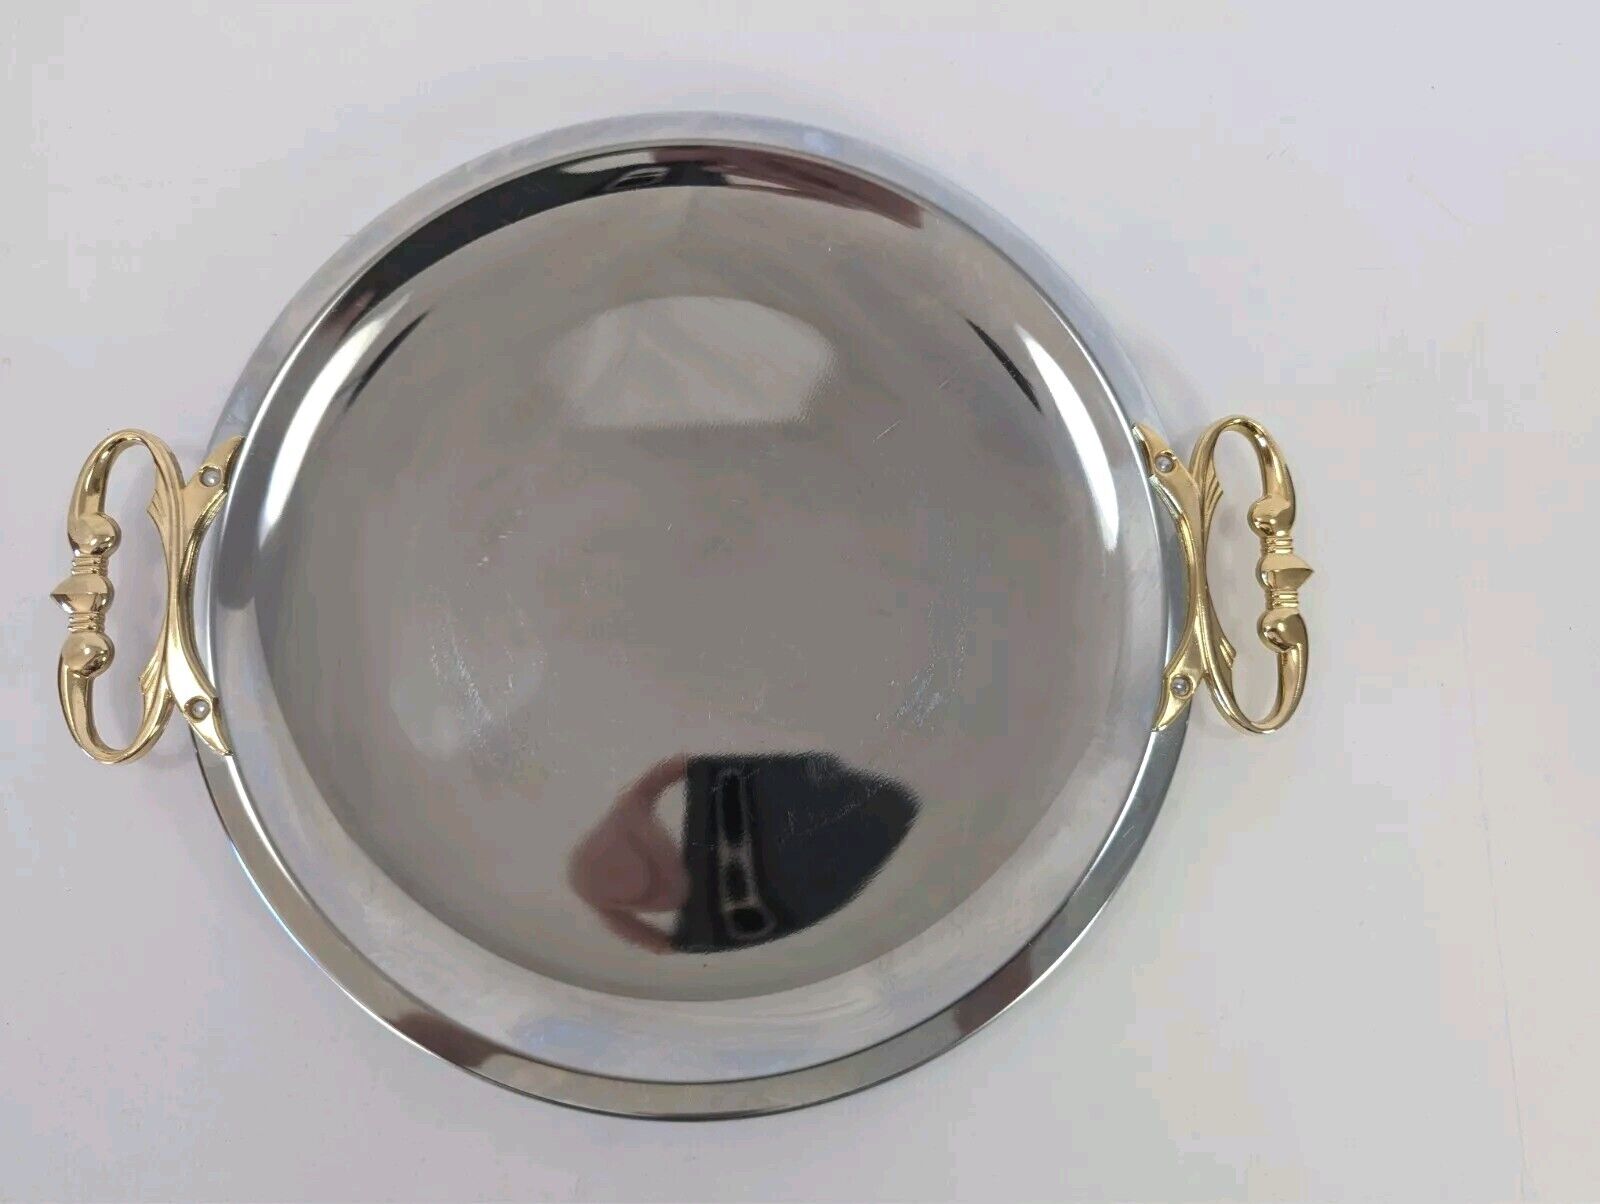 Kromex Serving Tray Chrome Round Serving Tray Gold Handles MCM Vintage USA